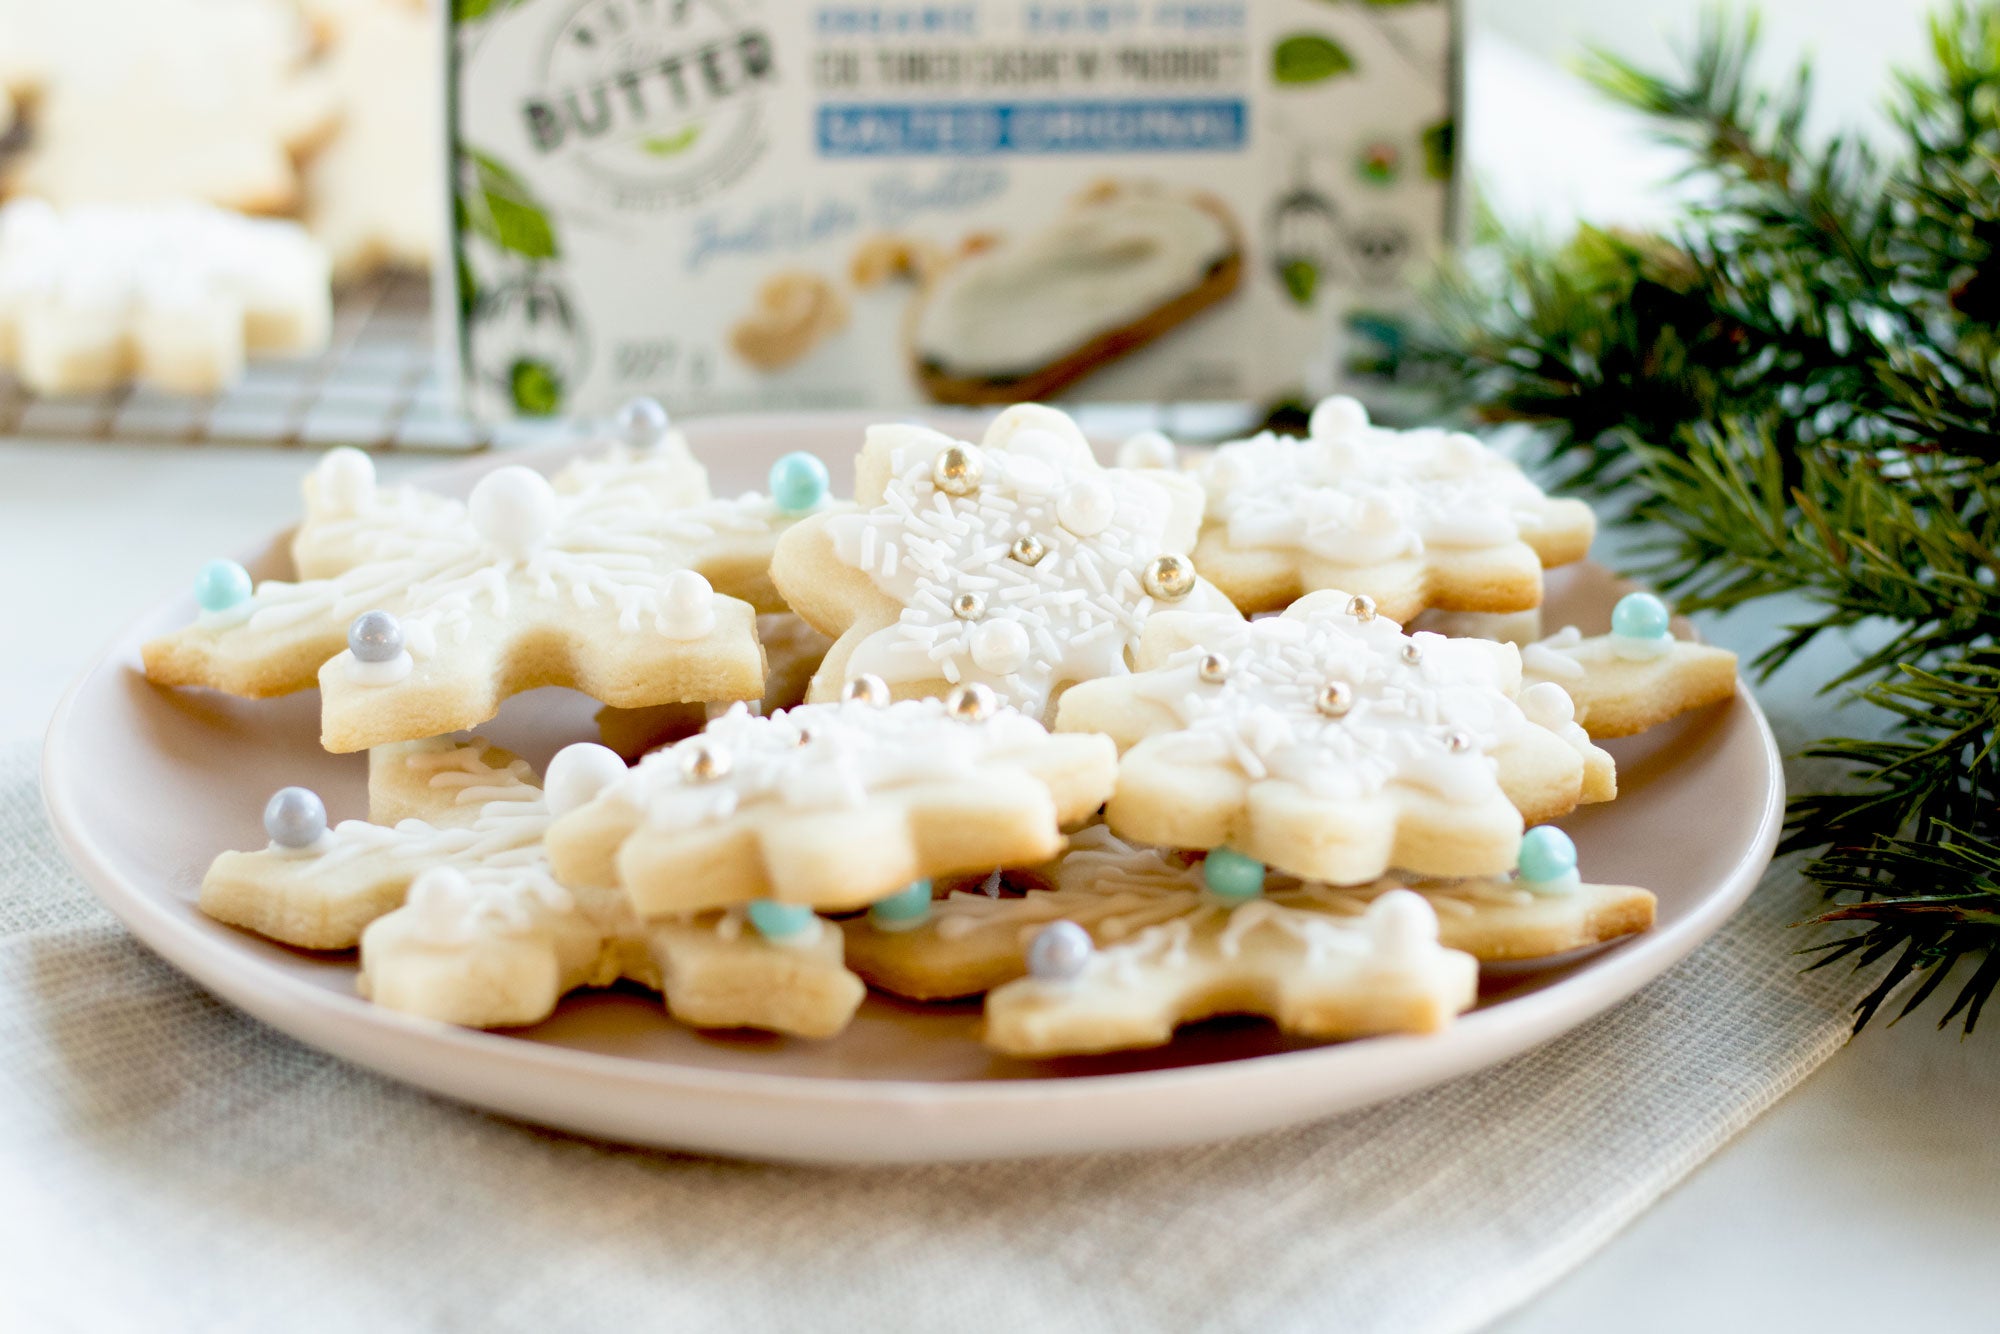 Plate of snowflake-shaped vegan butter sugar cookies topped with white icing and sprinkles. In the background is a box of dairy-free butter and more cookies on a cooling rack.